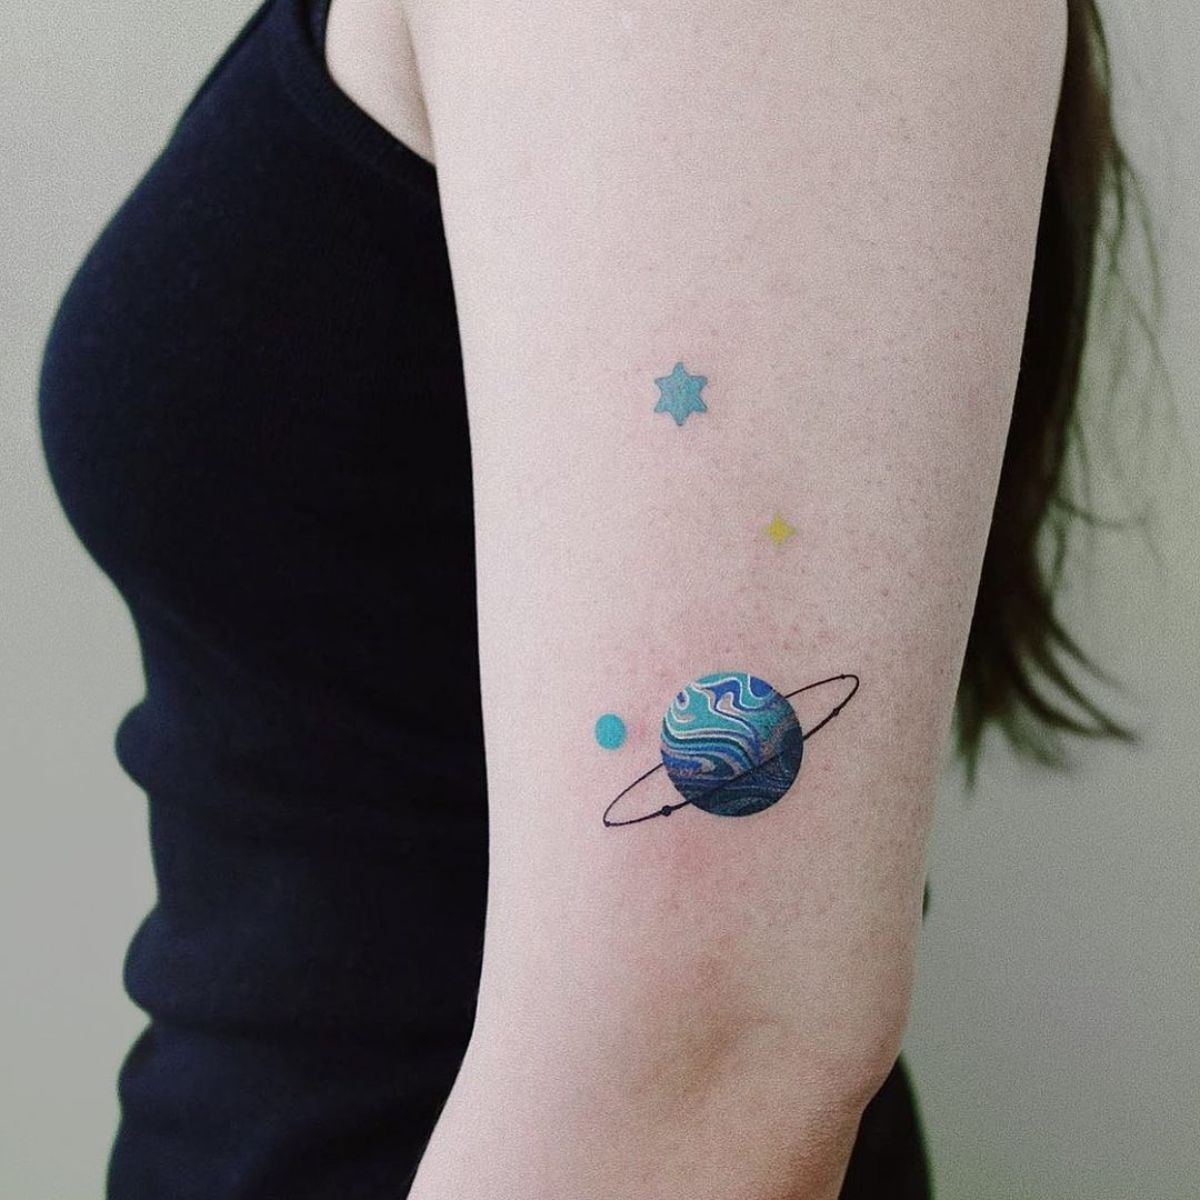 Aggregate more than 73 saturn tattoo meaning latest - thtantai2